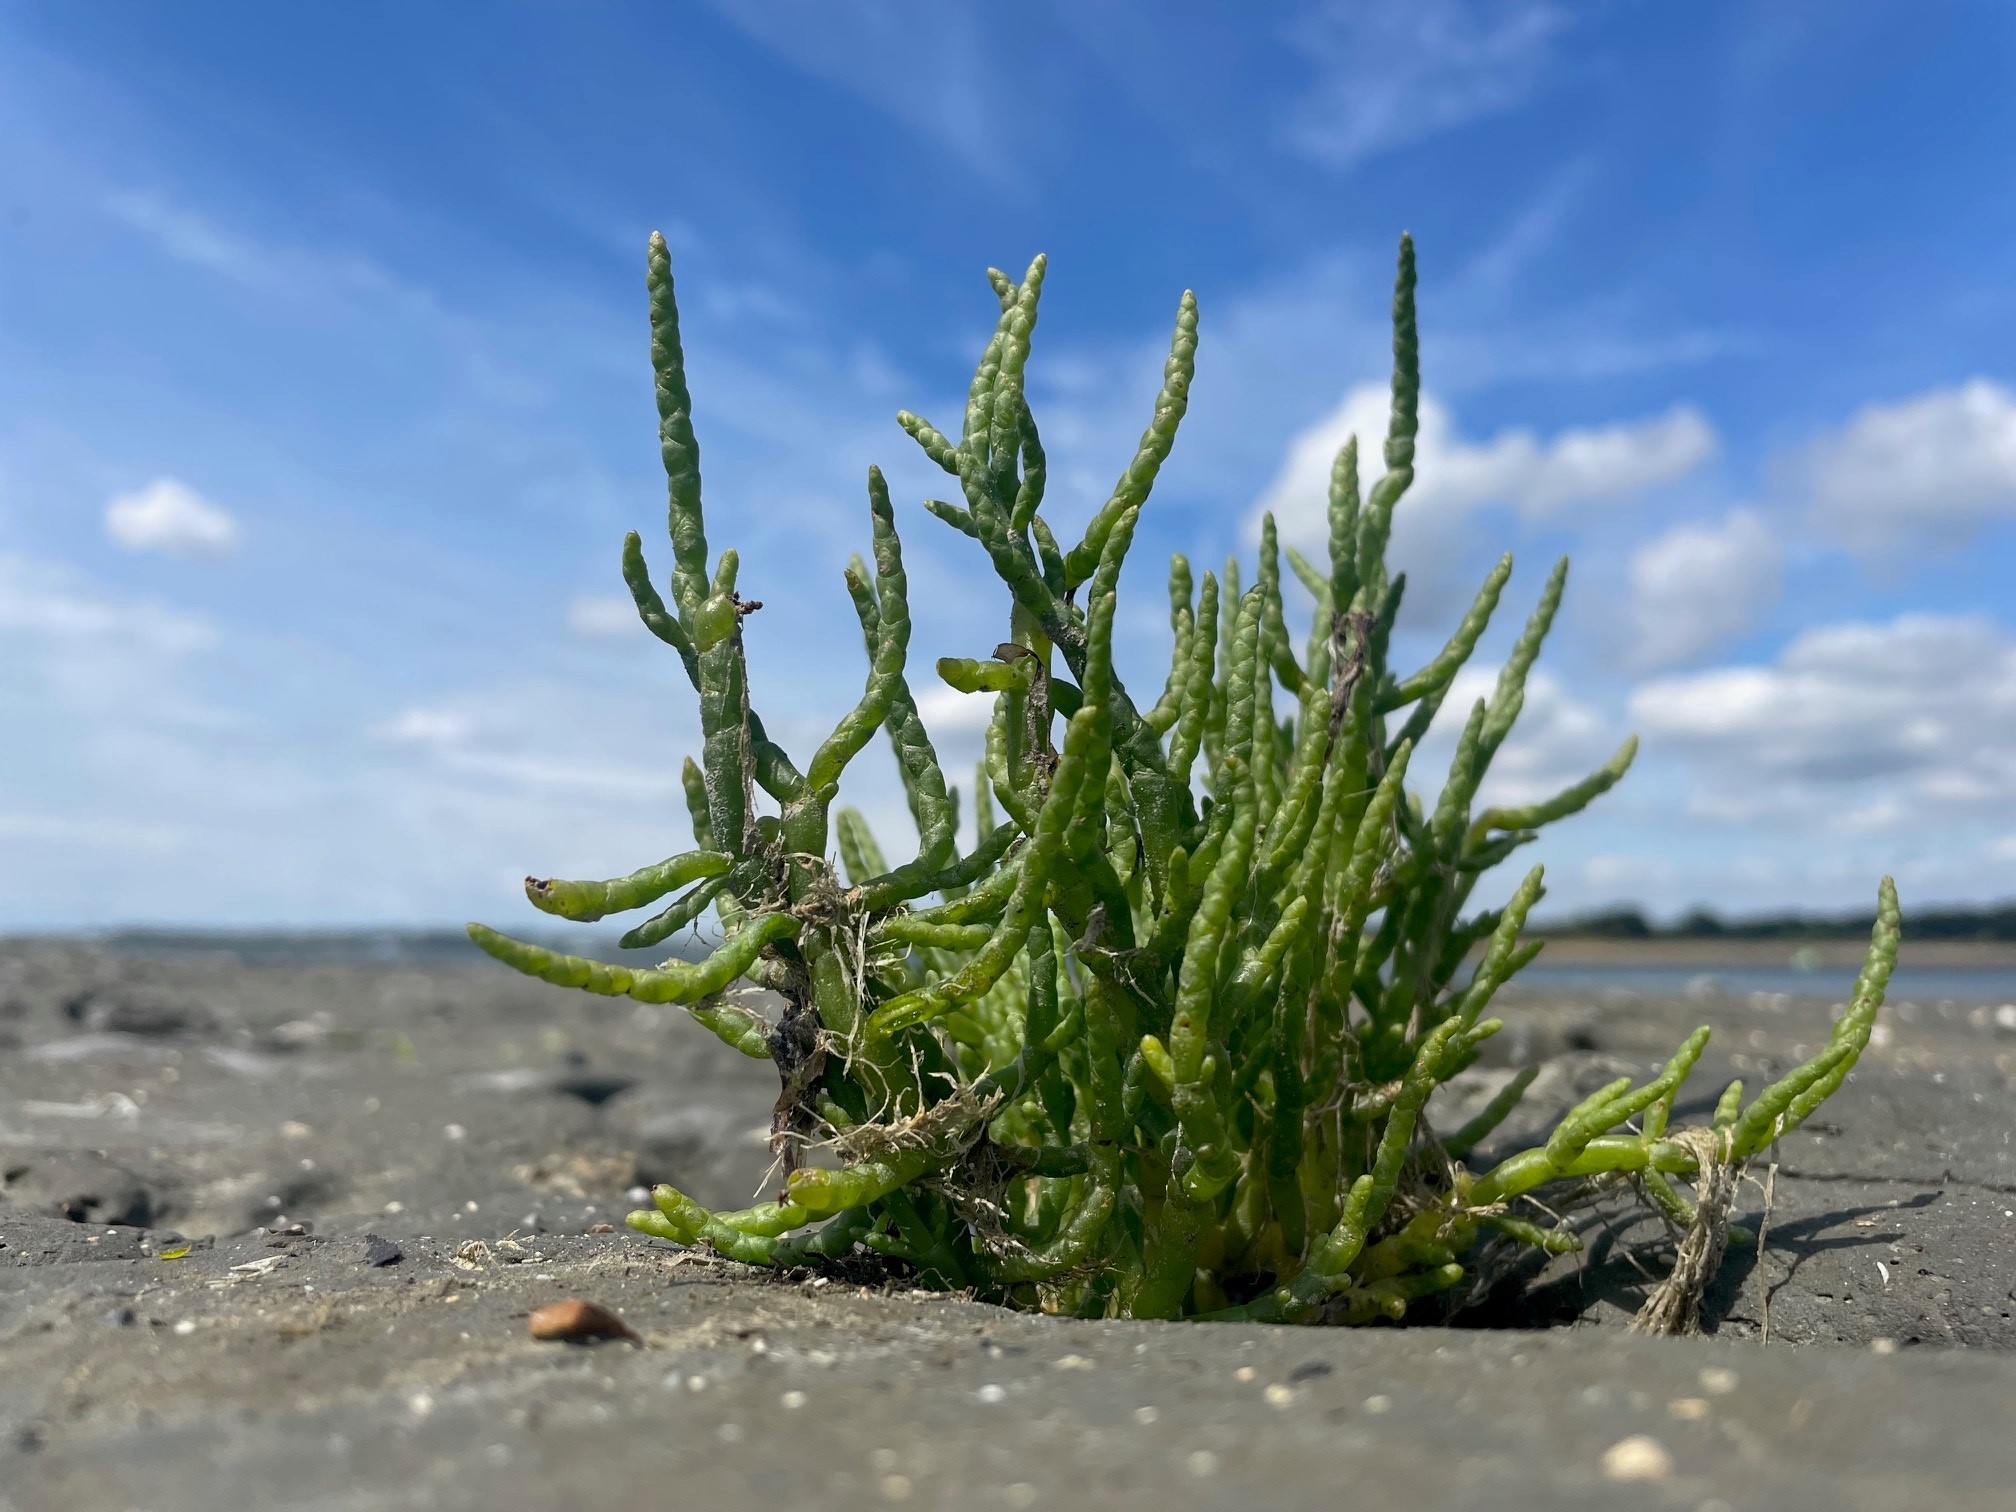 Green glasswort plant shoots emerge from the sand on the restored saltmarsh